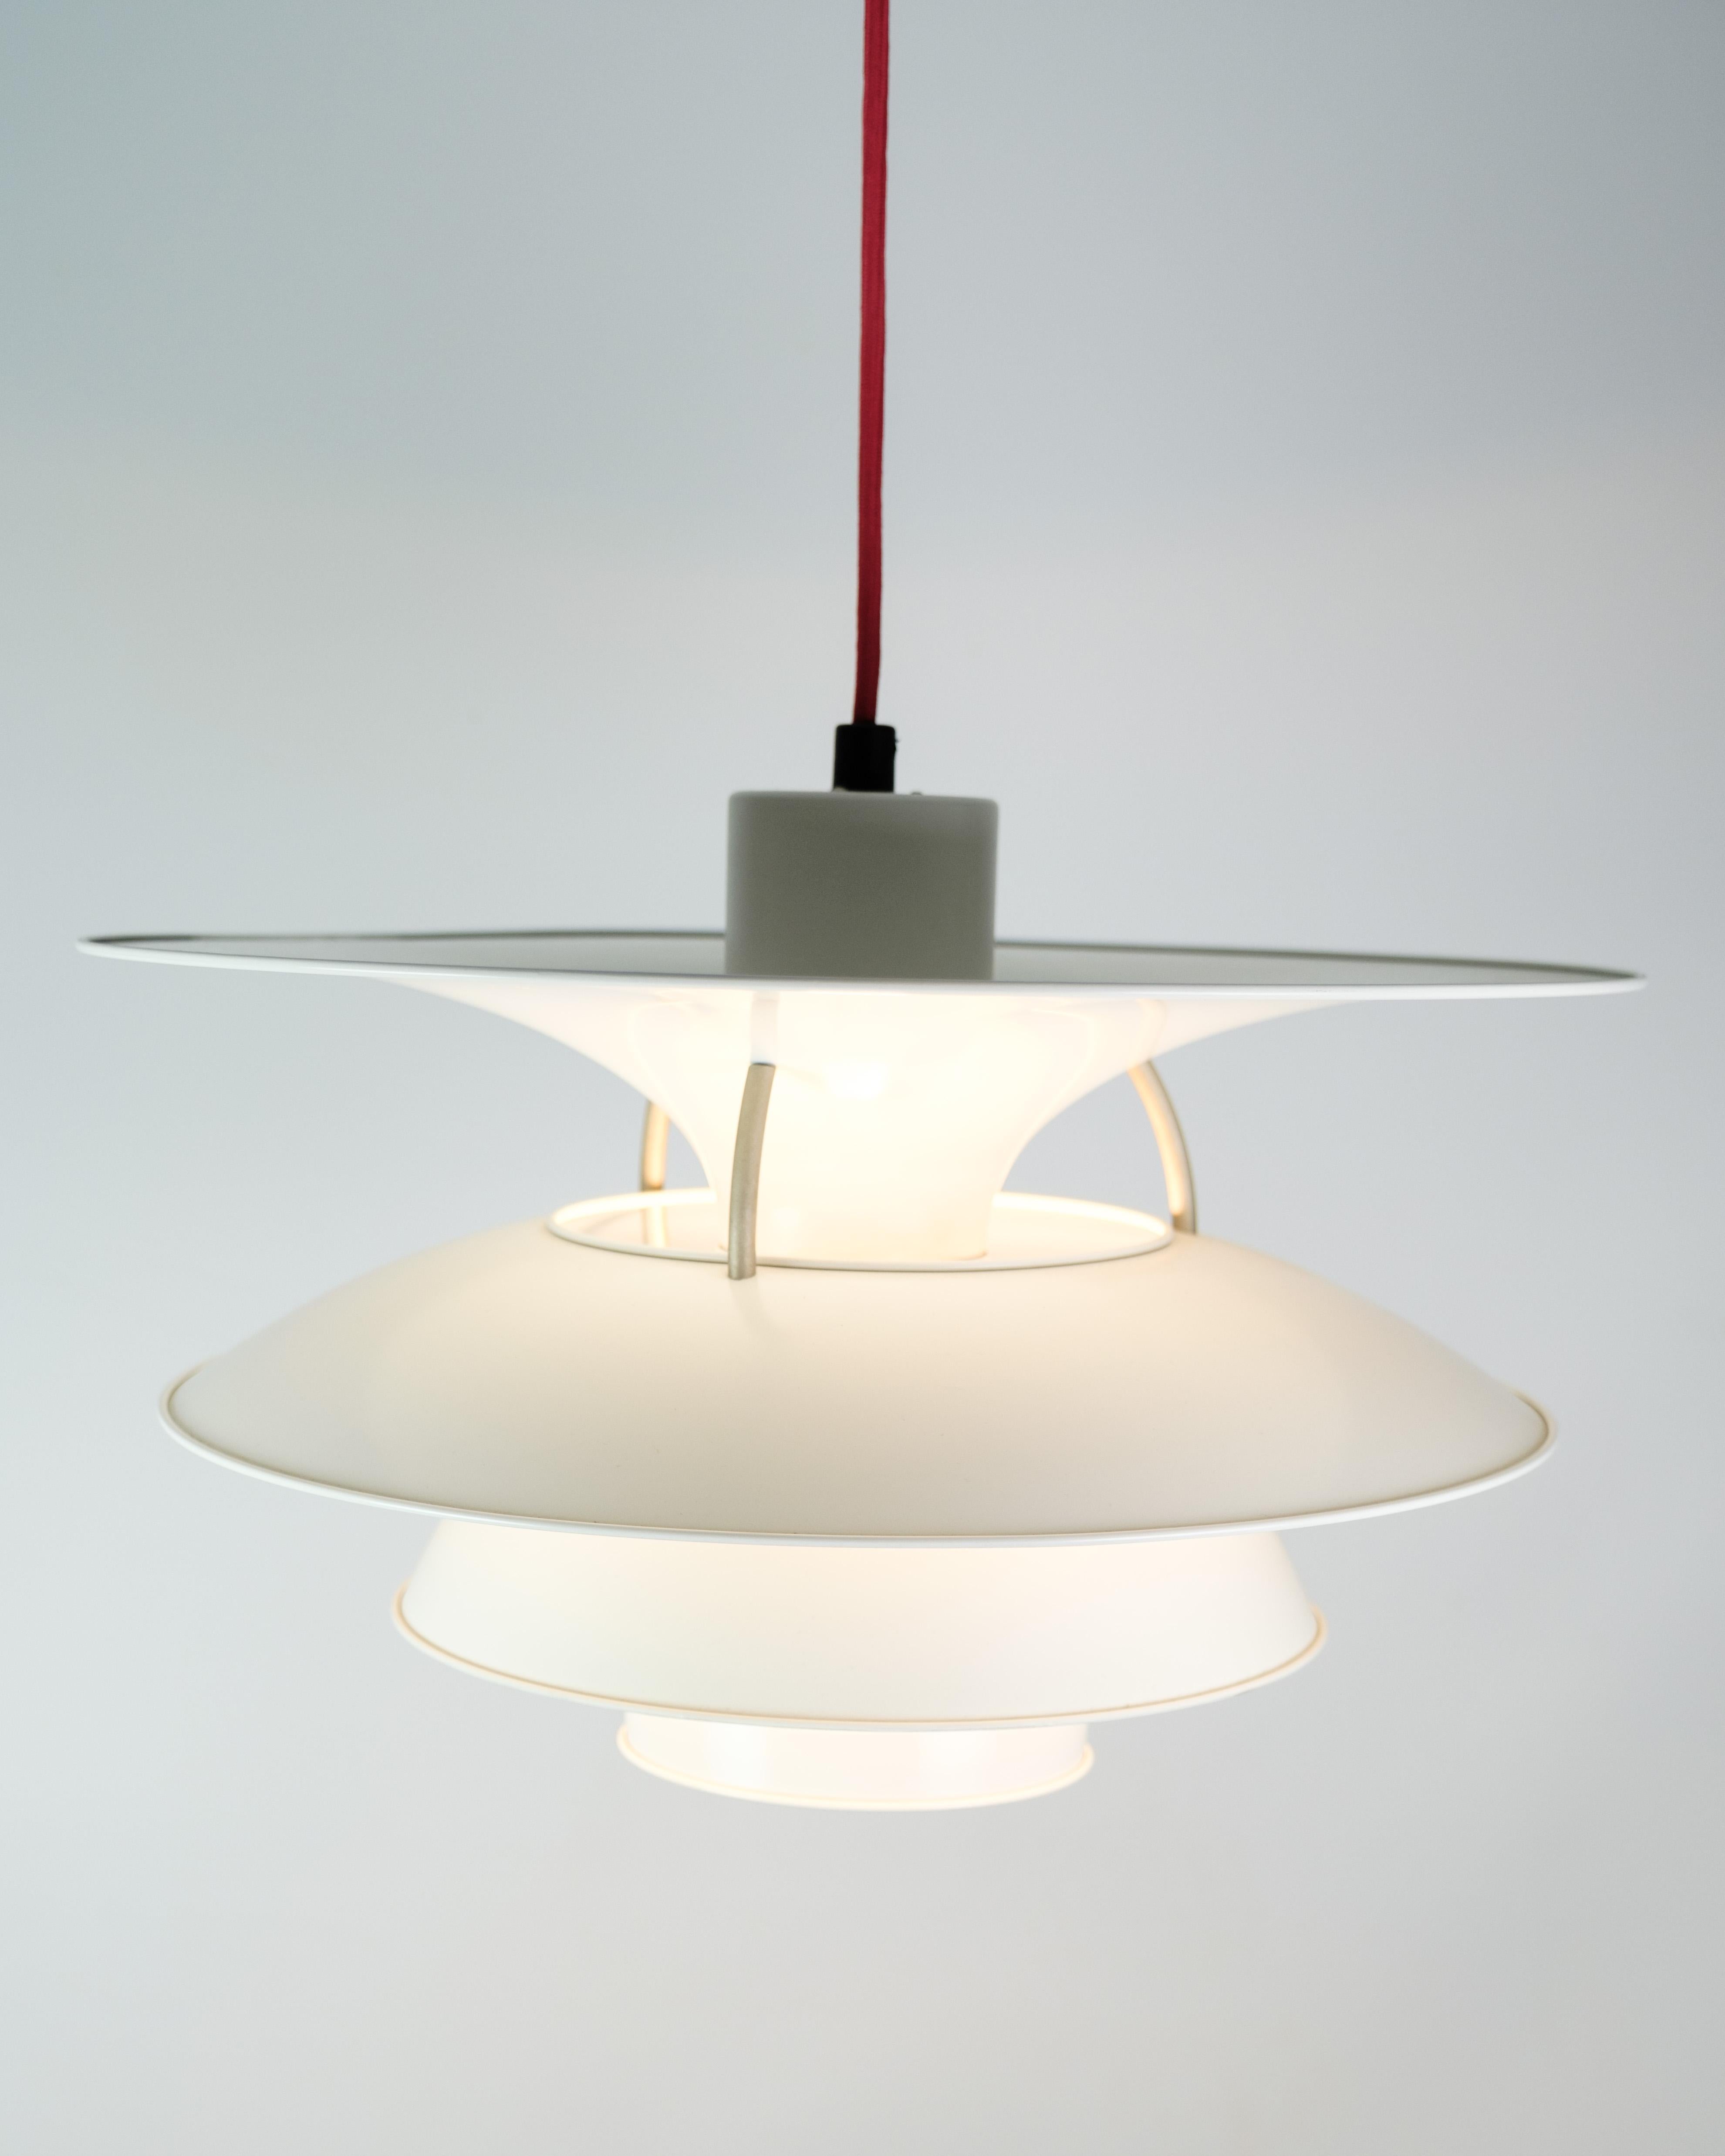 Charlottenborg pendant, model PH 5-4½/1x70W E27 by Ebbe Christensen & Sophus Frandsen based on Poul Henningsen's drawings for Louis Poulsen.

This product will be inspected thoroughly at our professional workshop by our educated employees, who